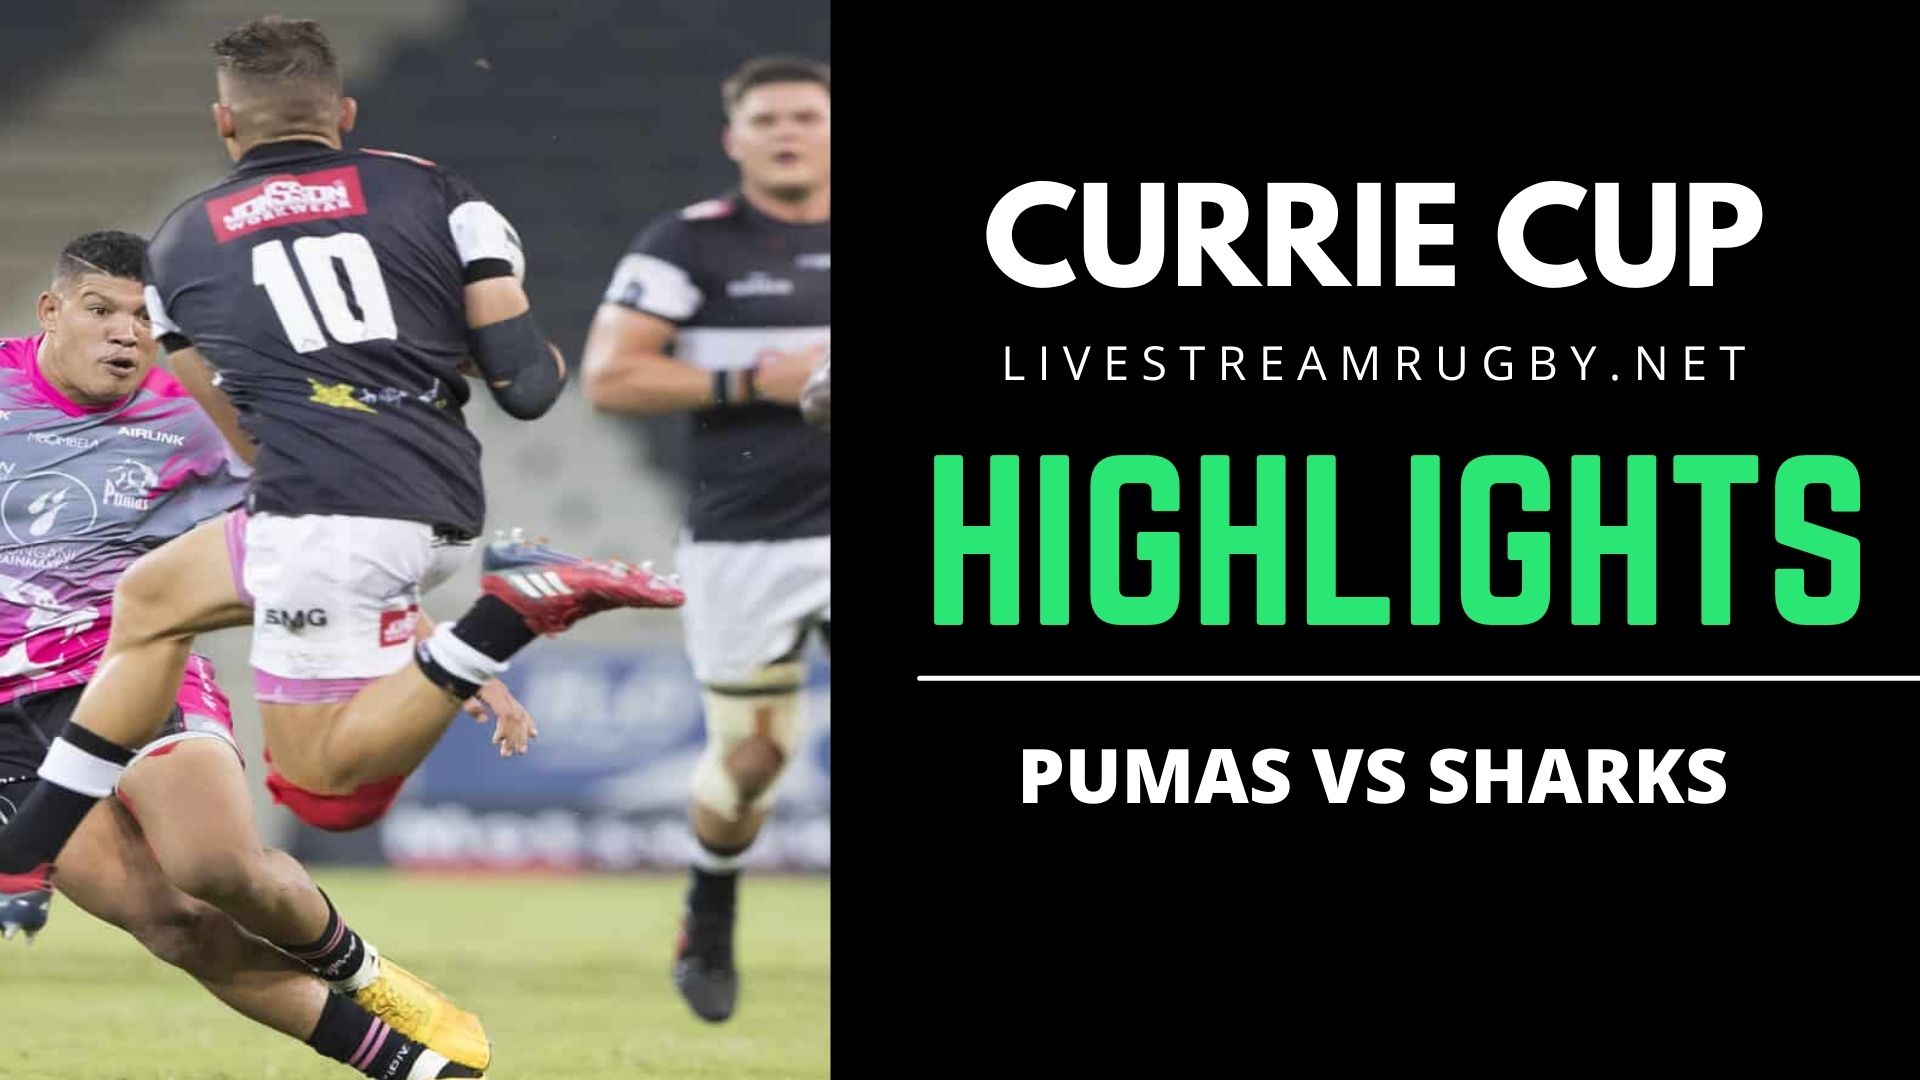 Pumas Vs Sharks Rd 5 Highlights 2022 Currie Cup